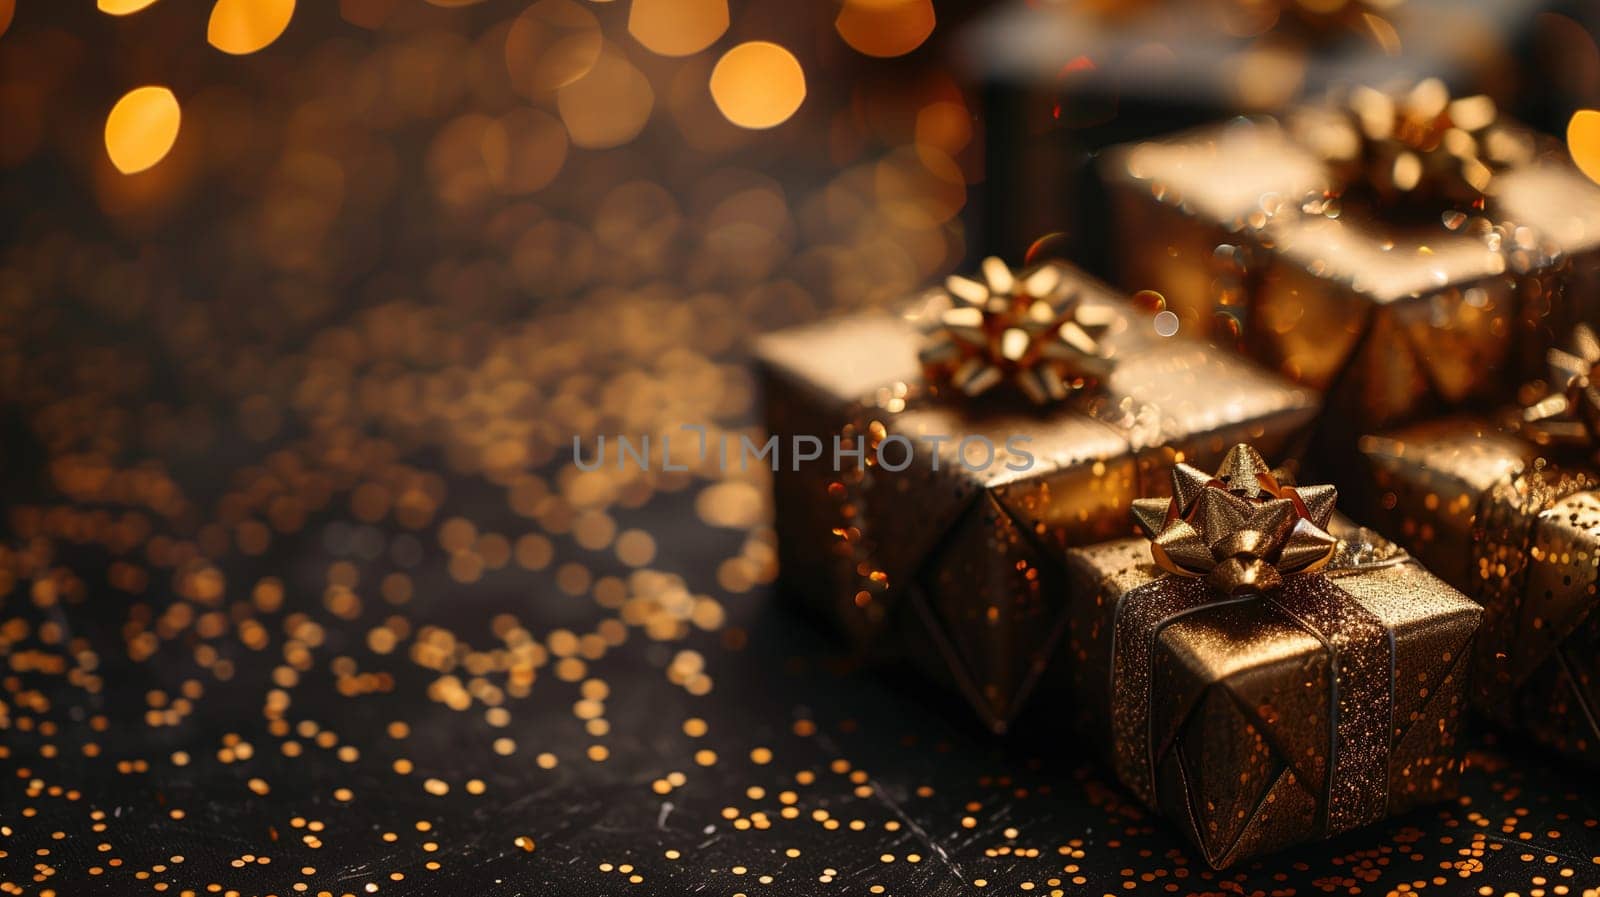 A group of shiny gold presents sitting neatly on top of a table. These gifts are likely part of a sale or Black Friday promotion, awaiting eager shoppers.